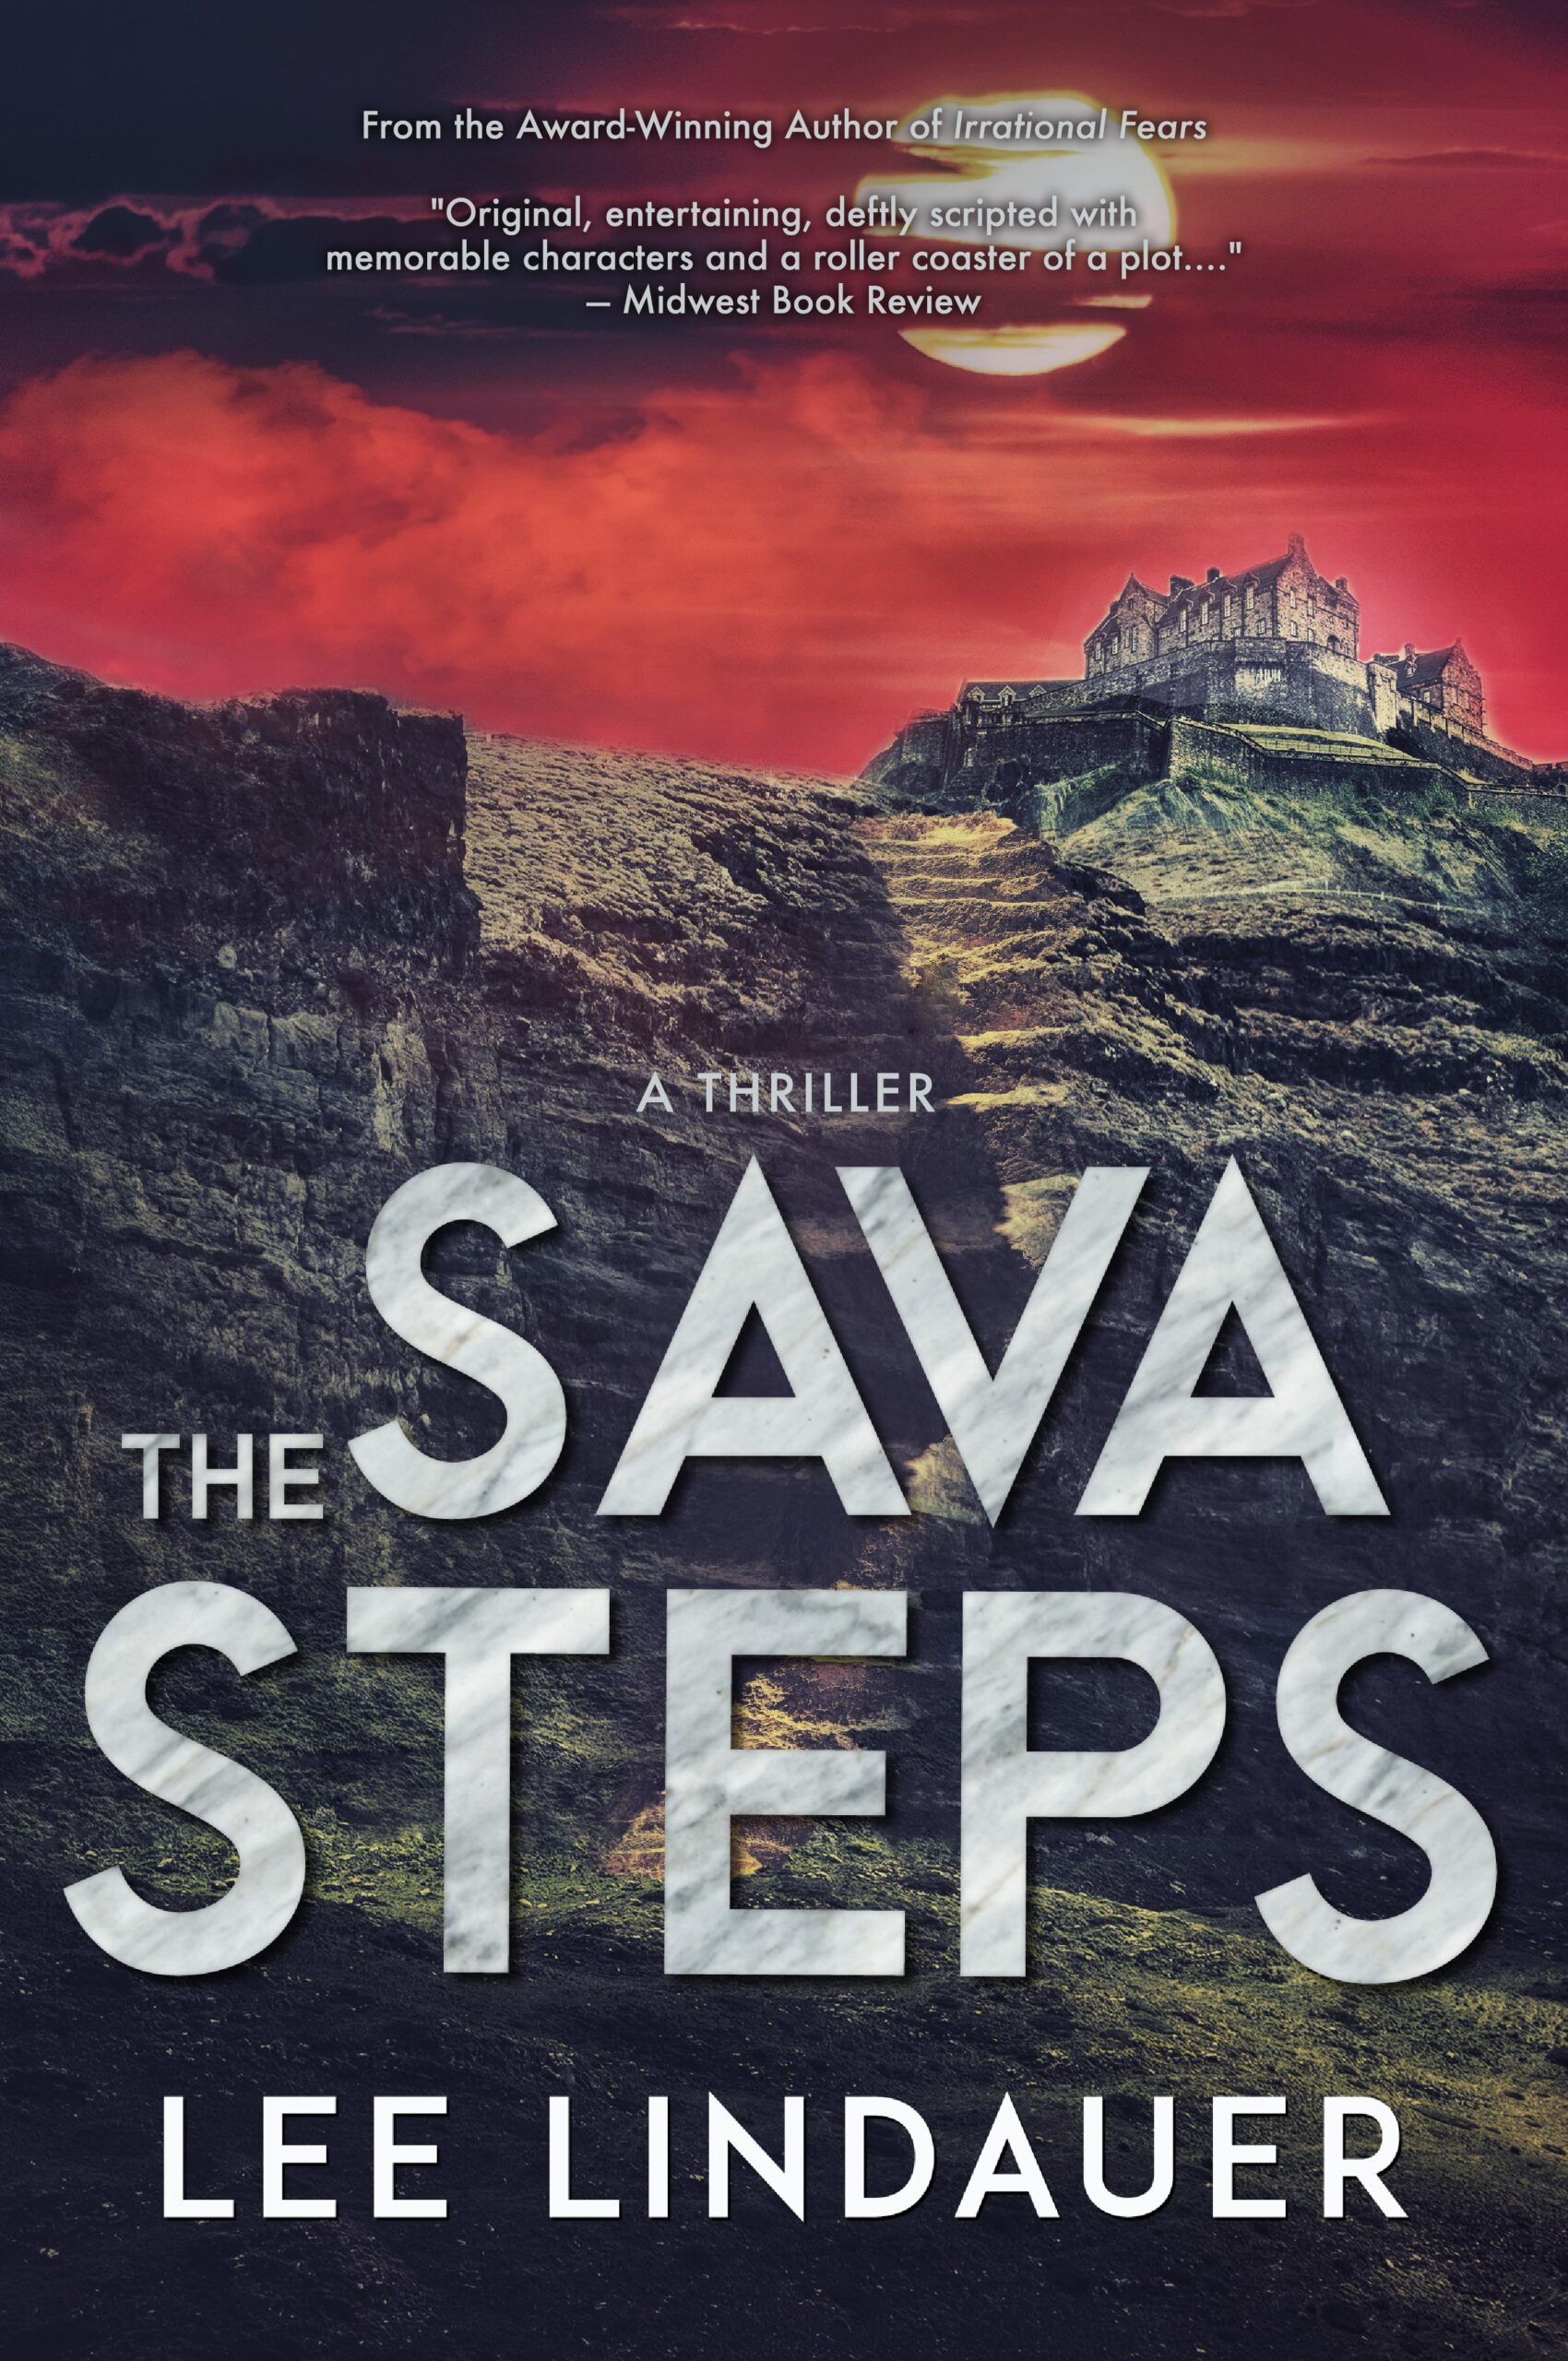 The Sava Steps by Lee Lindauer